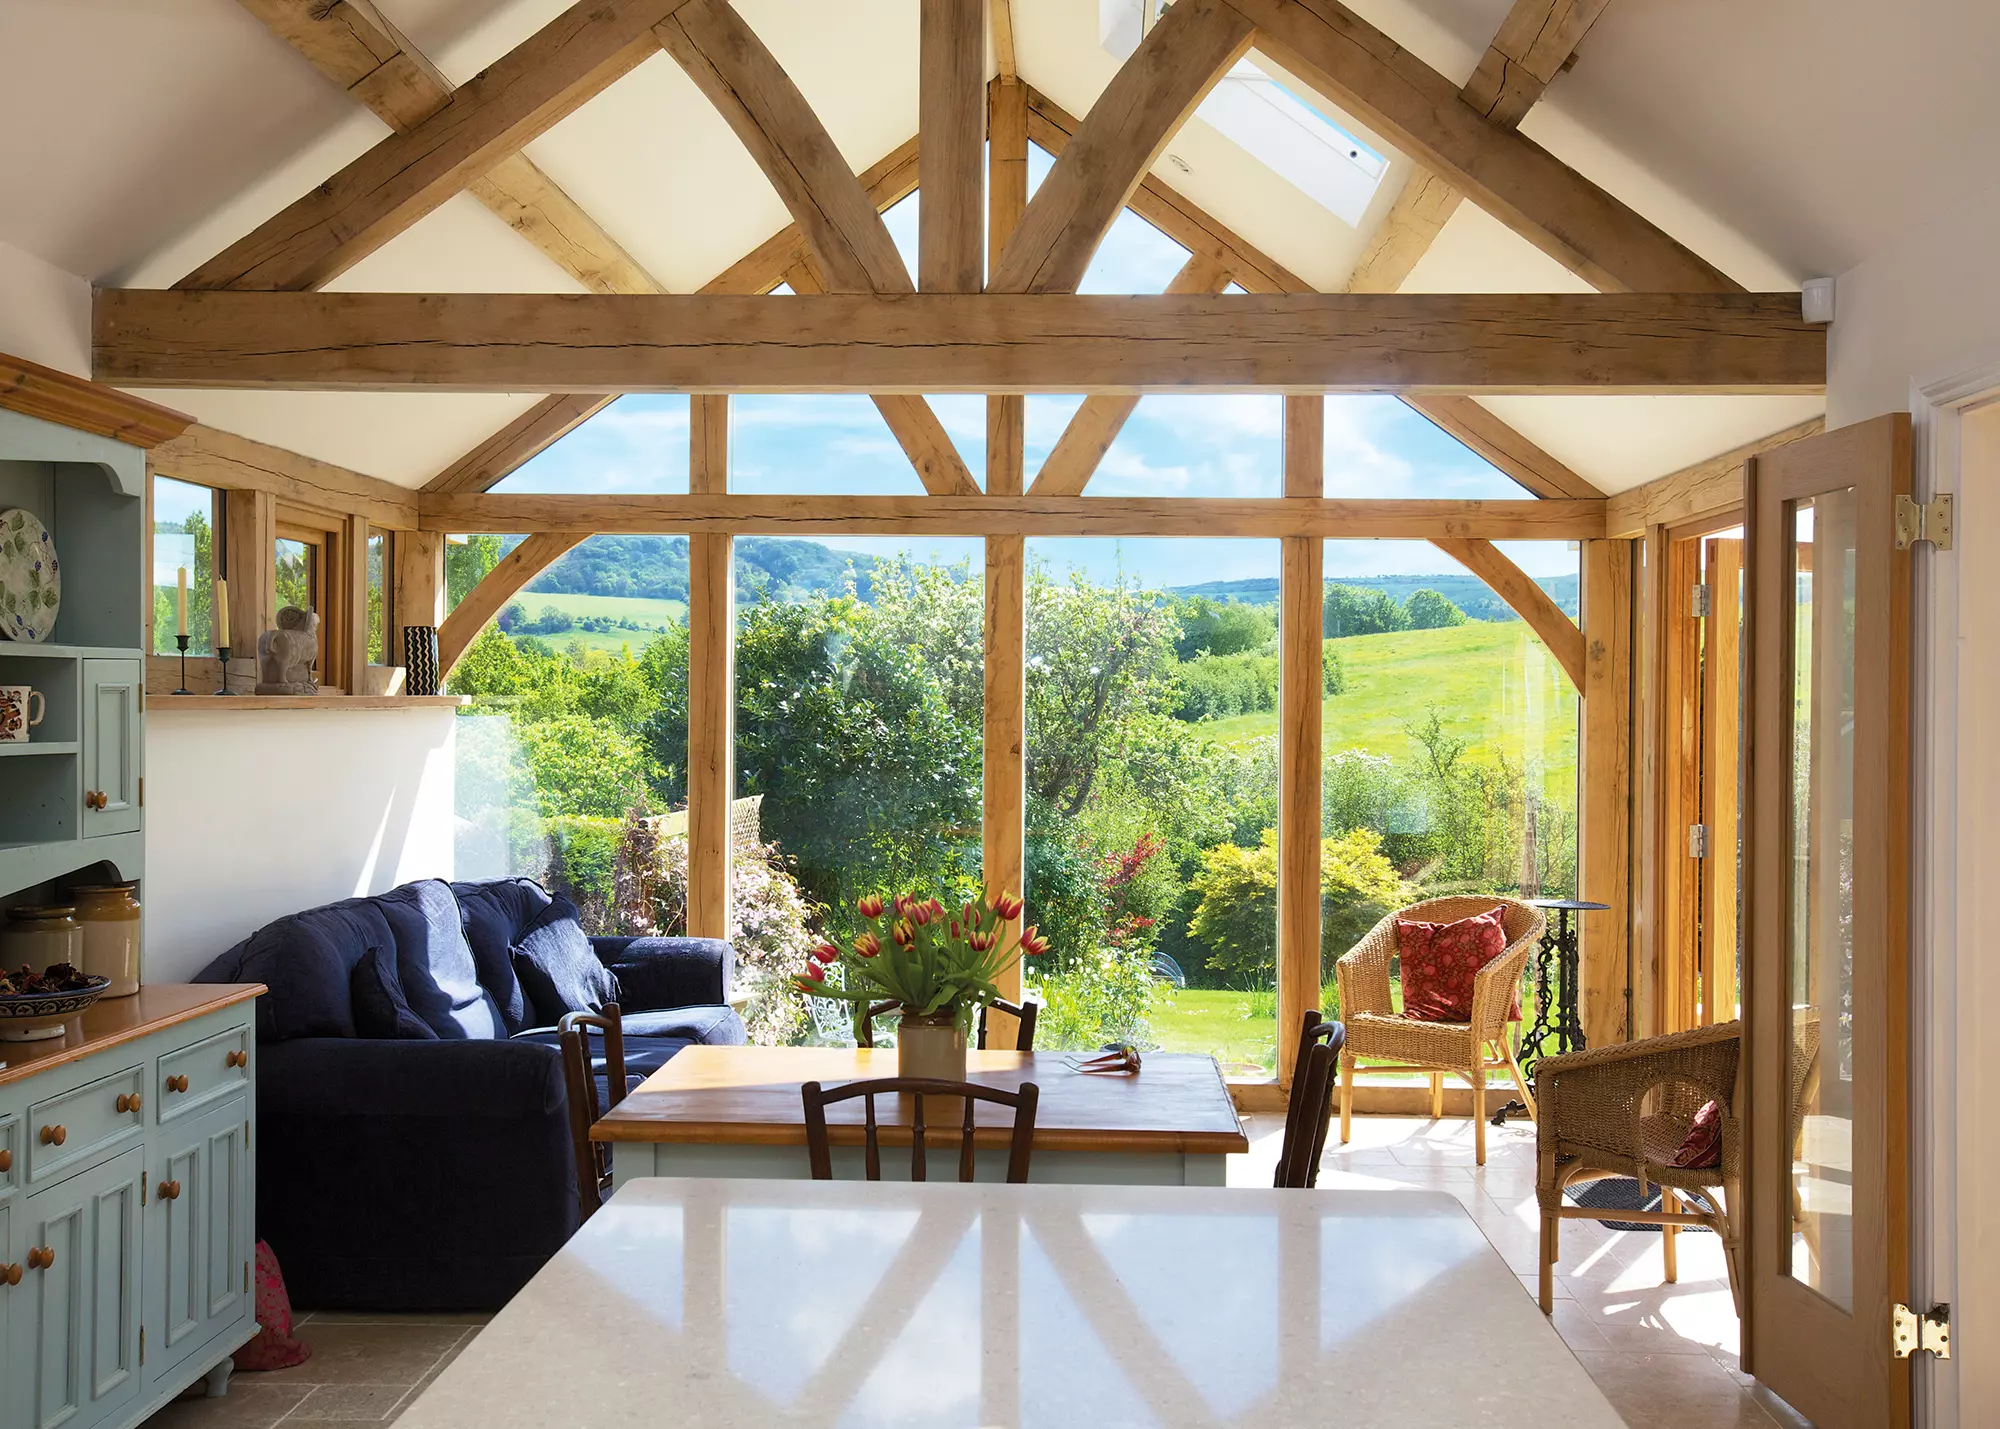 The Benefits of Oak Trusses in Your Home